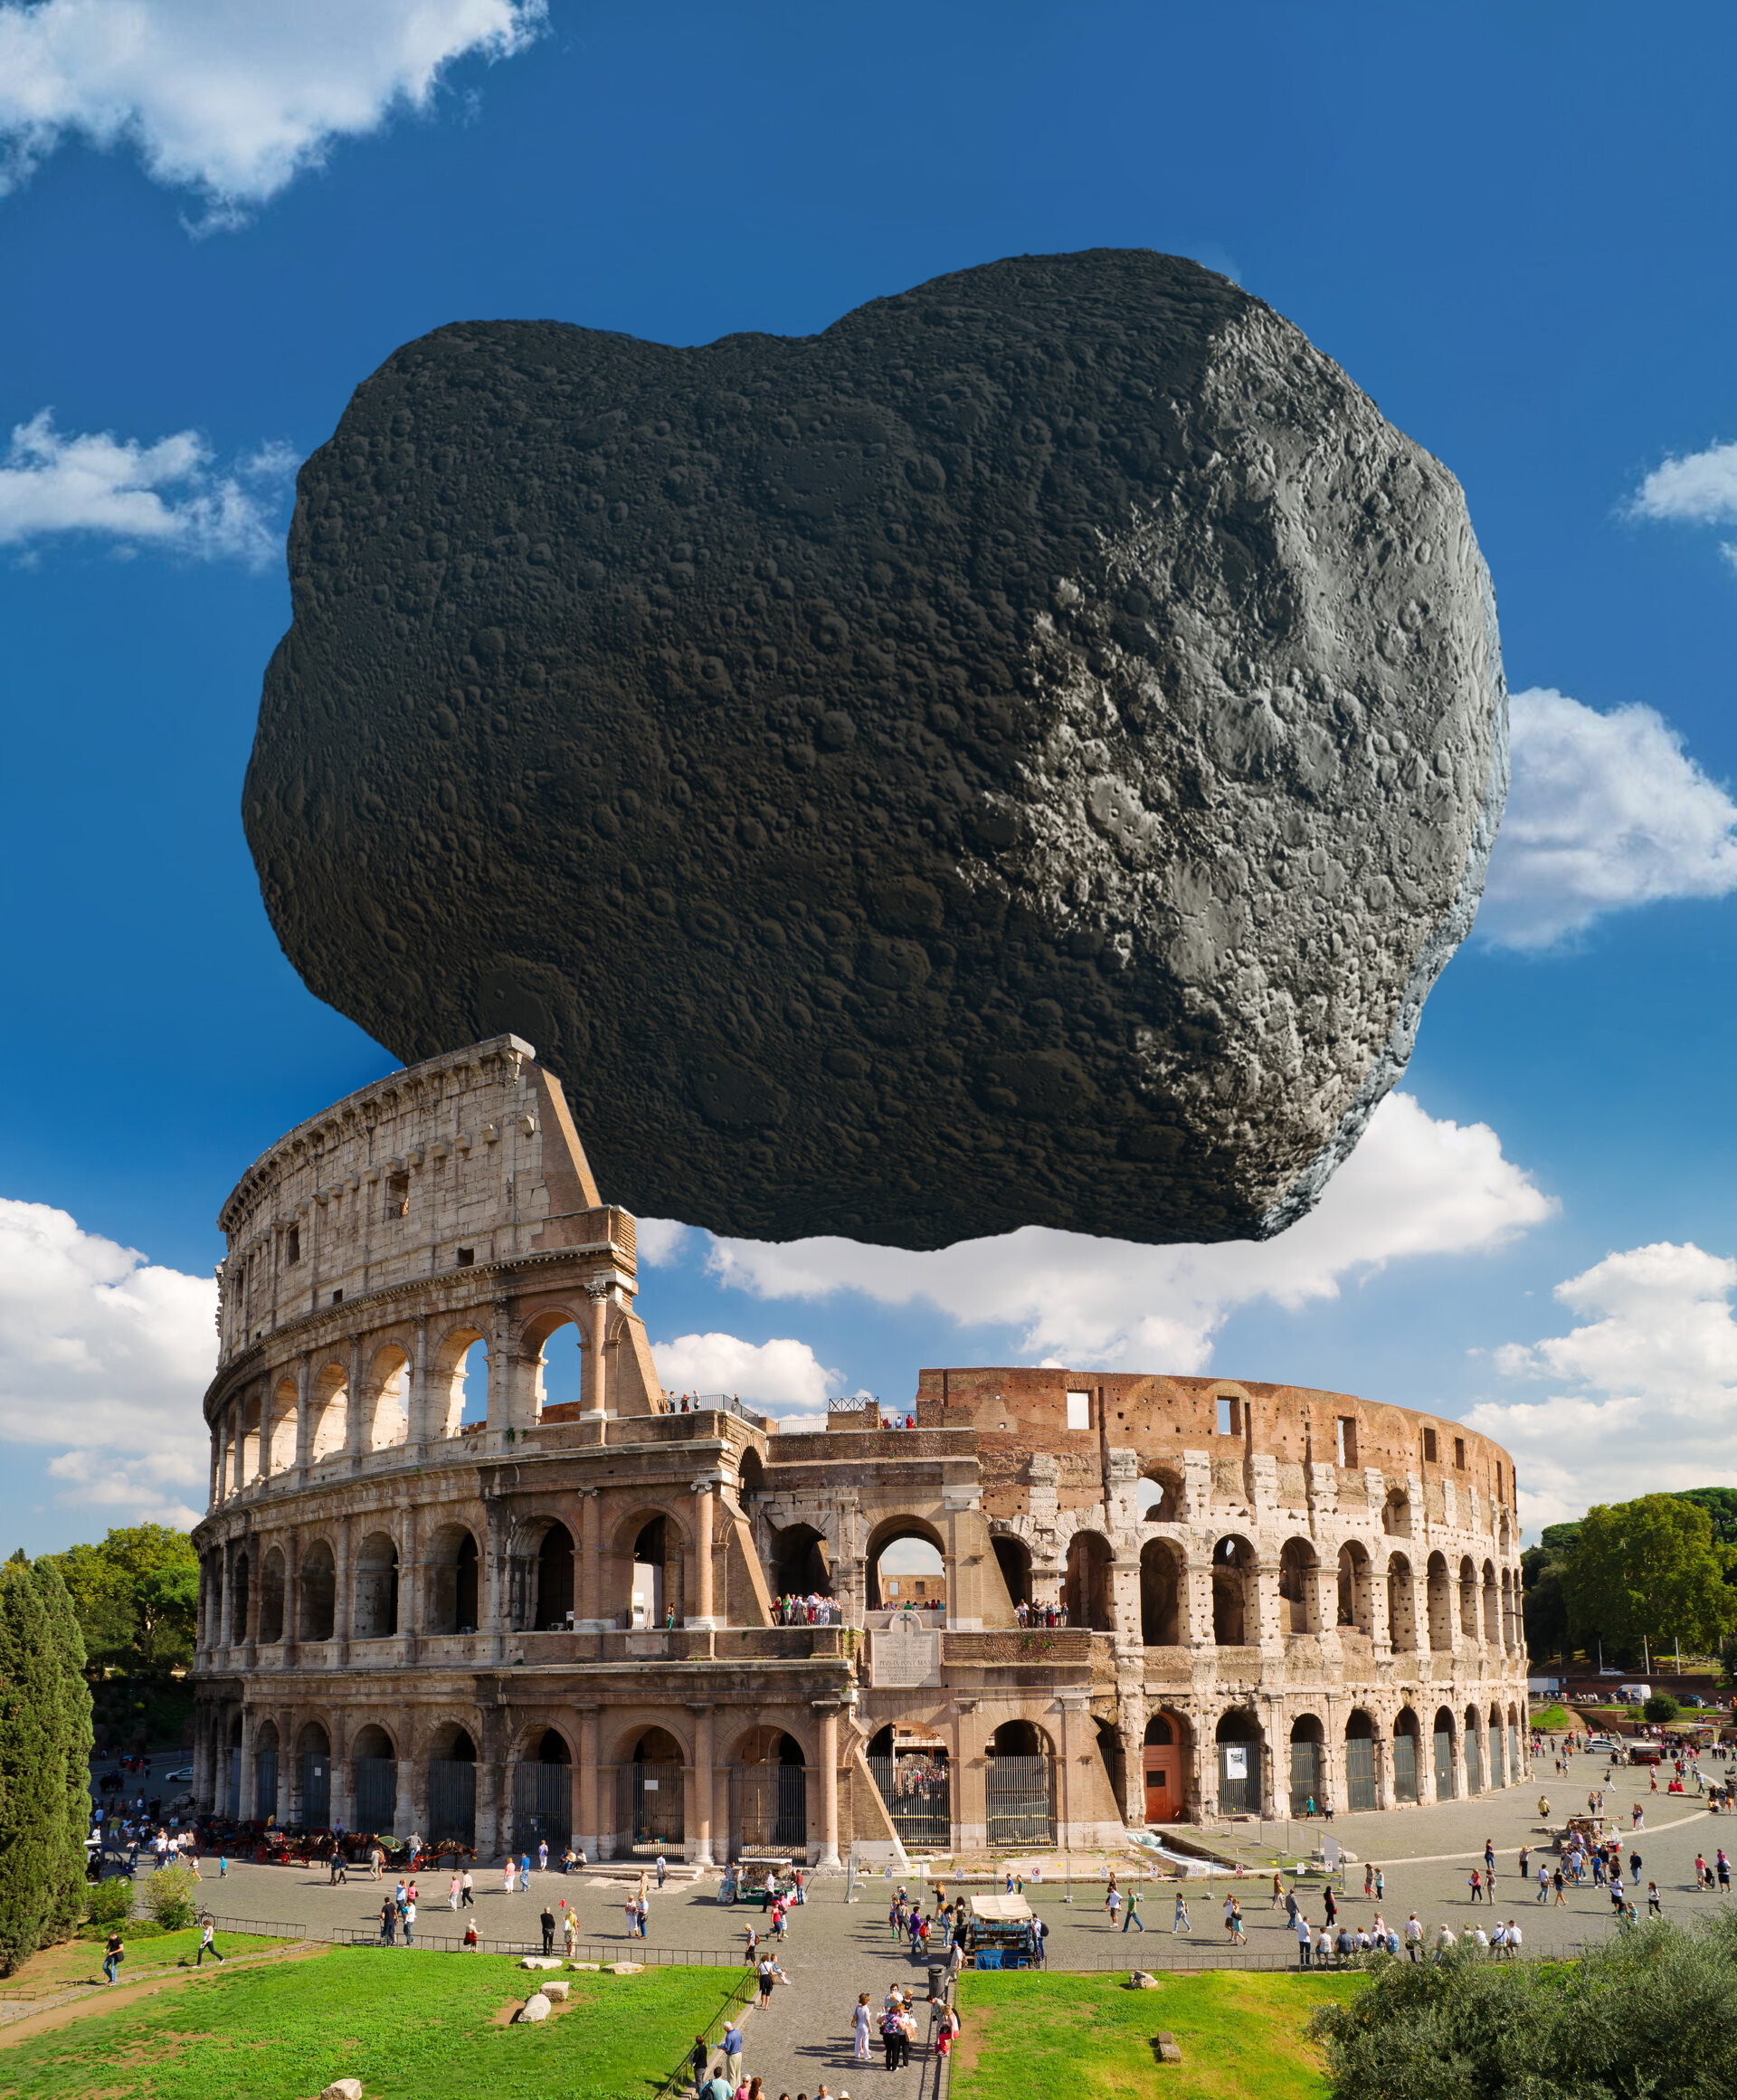 Dimorphos asteroid to scale with Rome's Colosseum